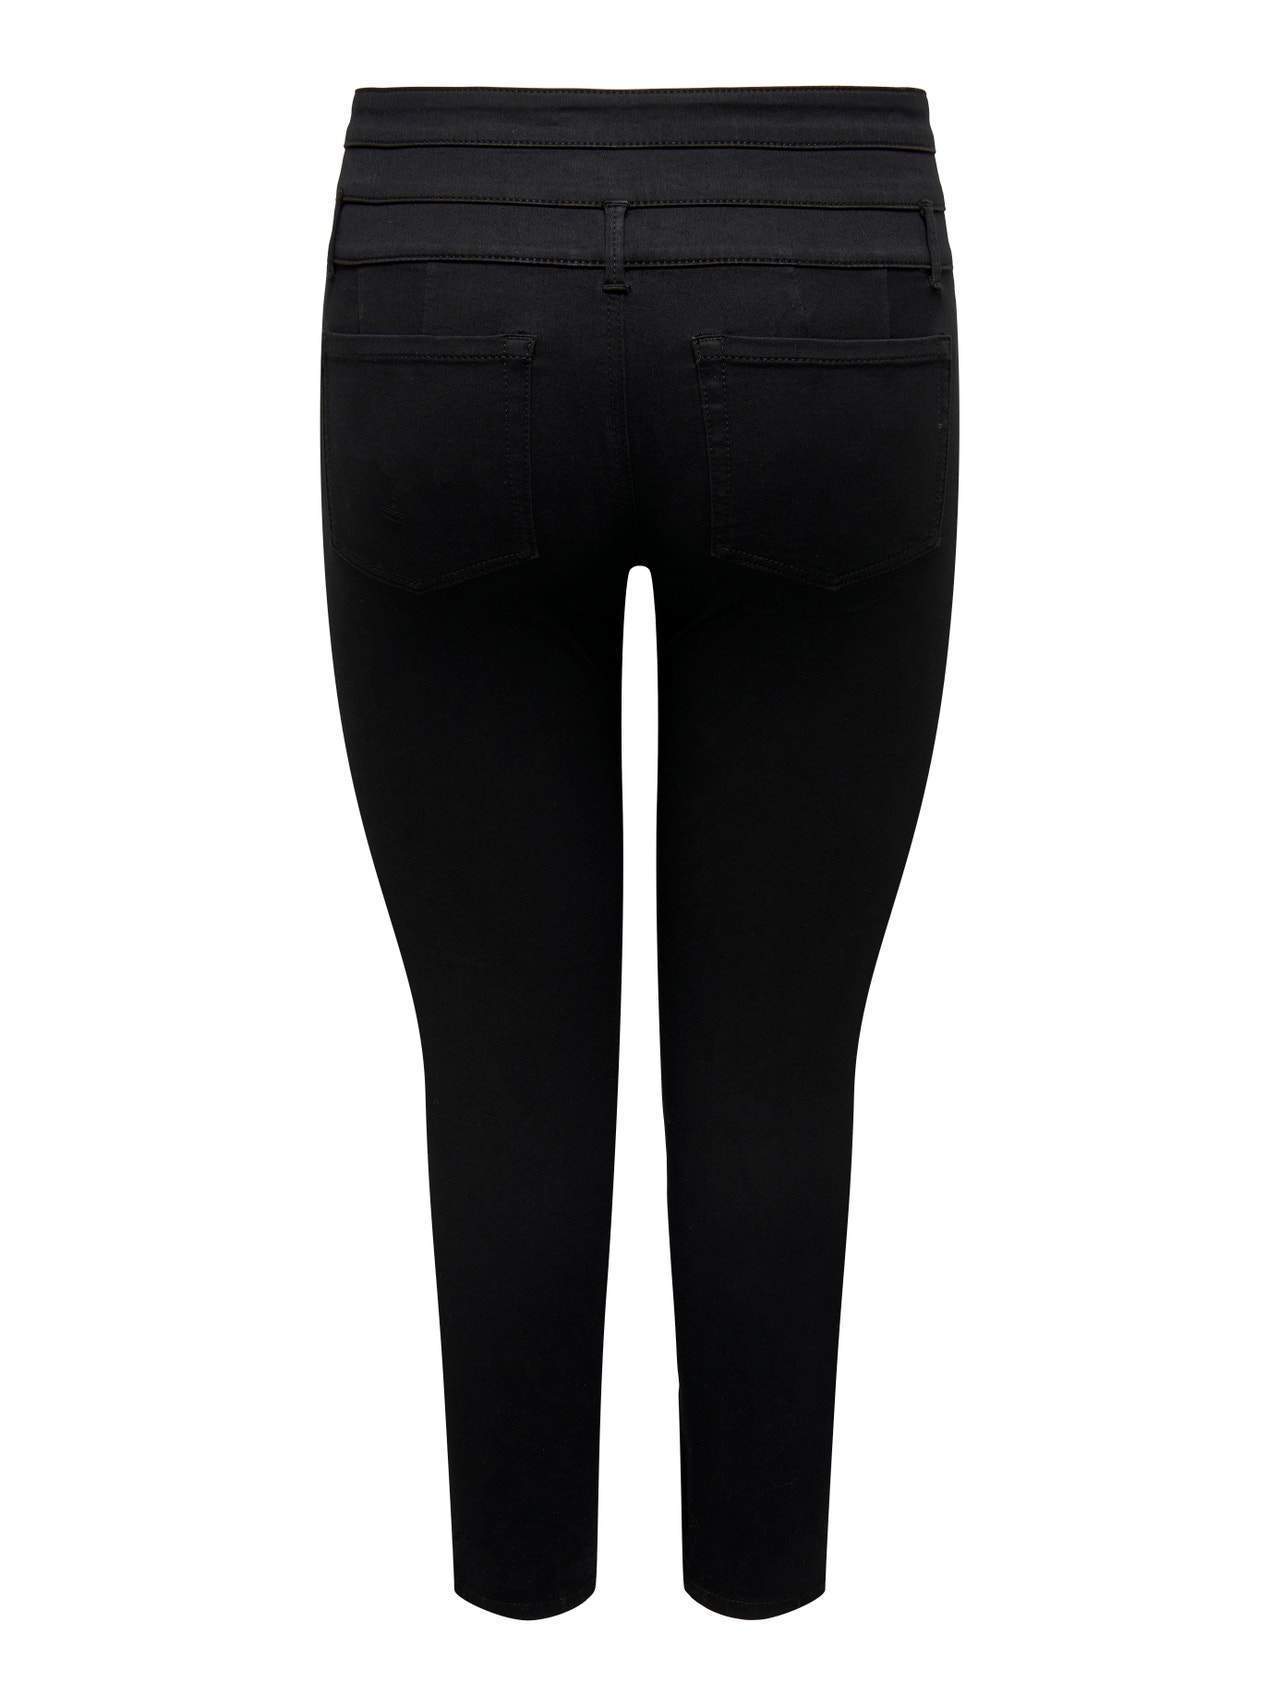 ONLY CARAUGUSTA High Waist SKINNY ANKLE Jeans -Black - 15300126